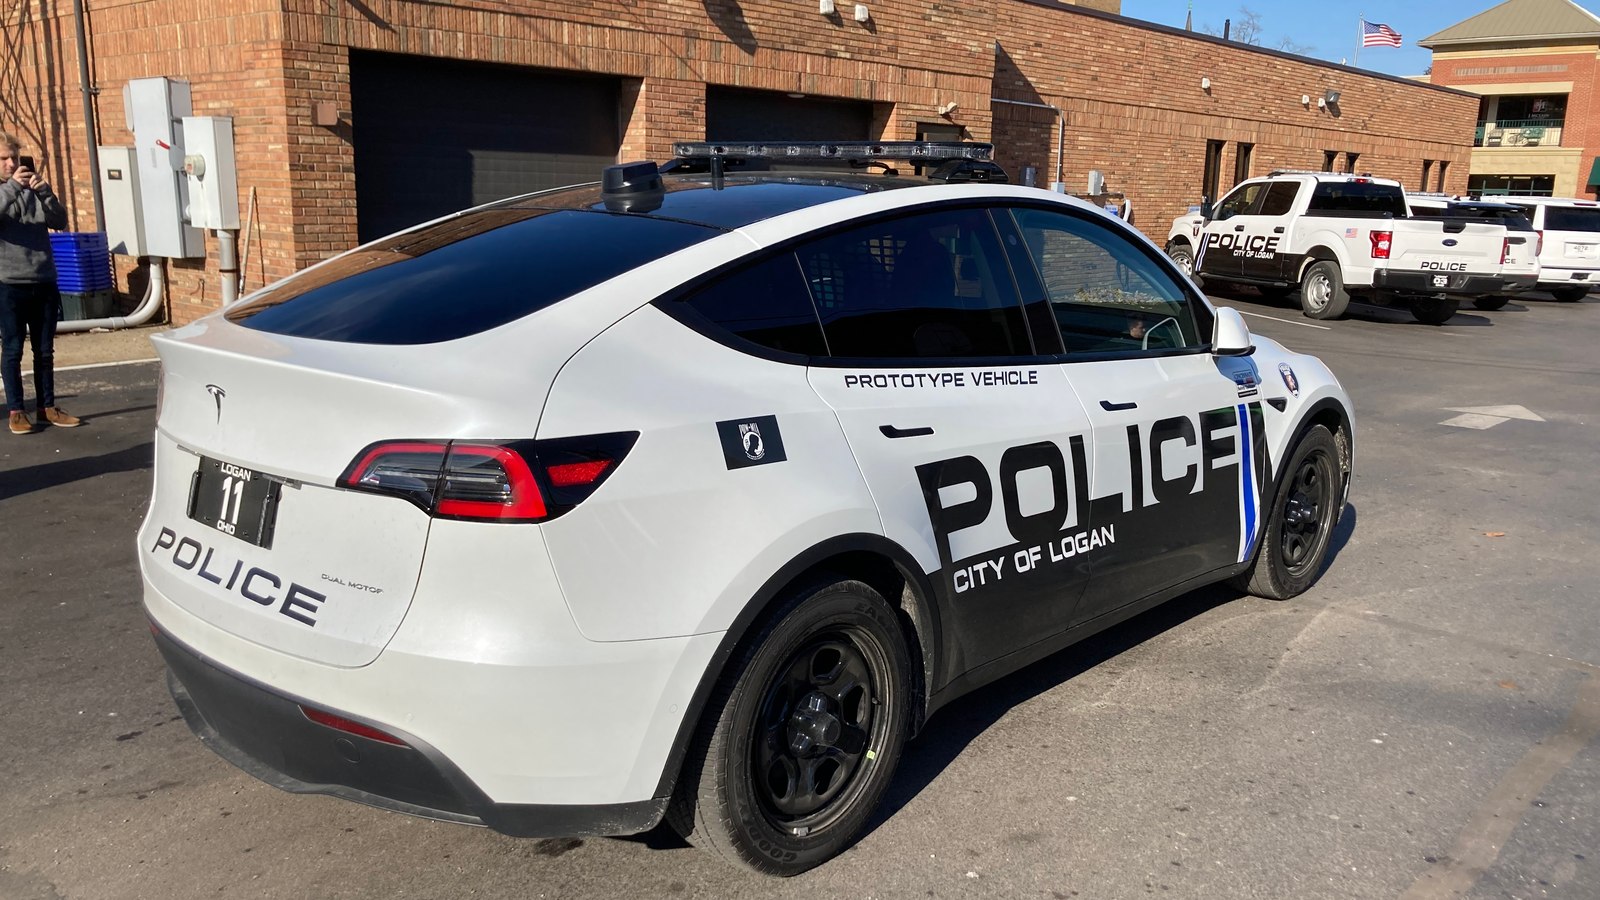 Fleet management considerations for police electric vehicles